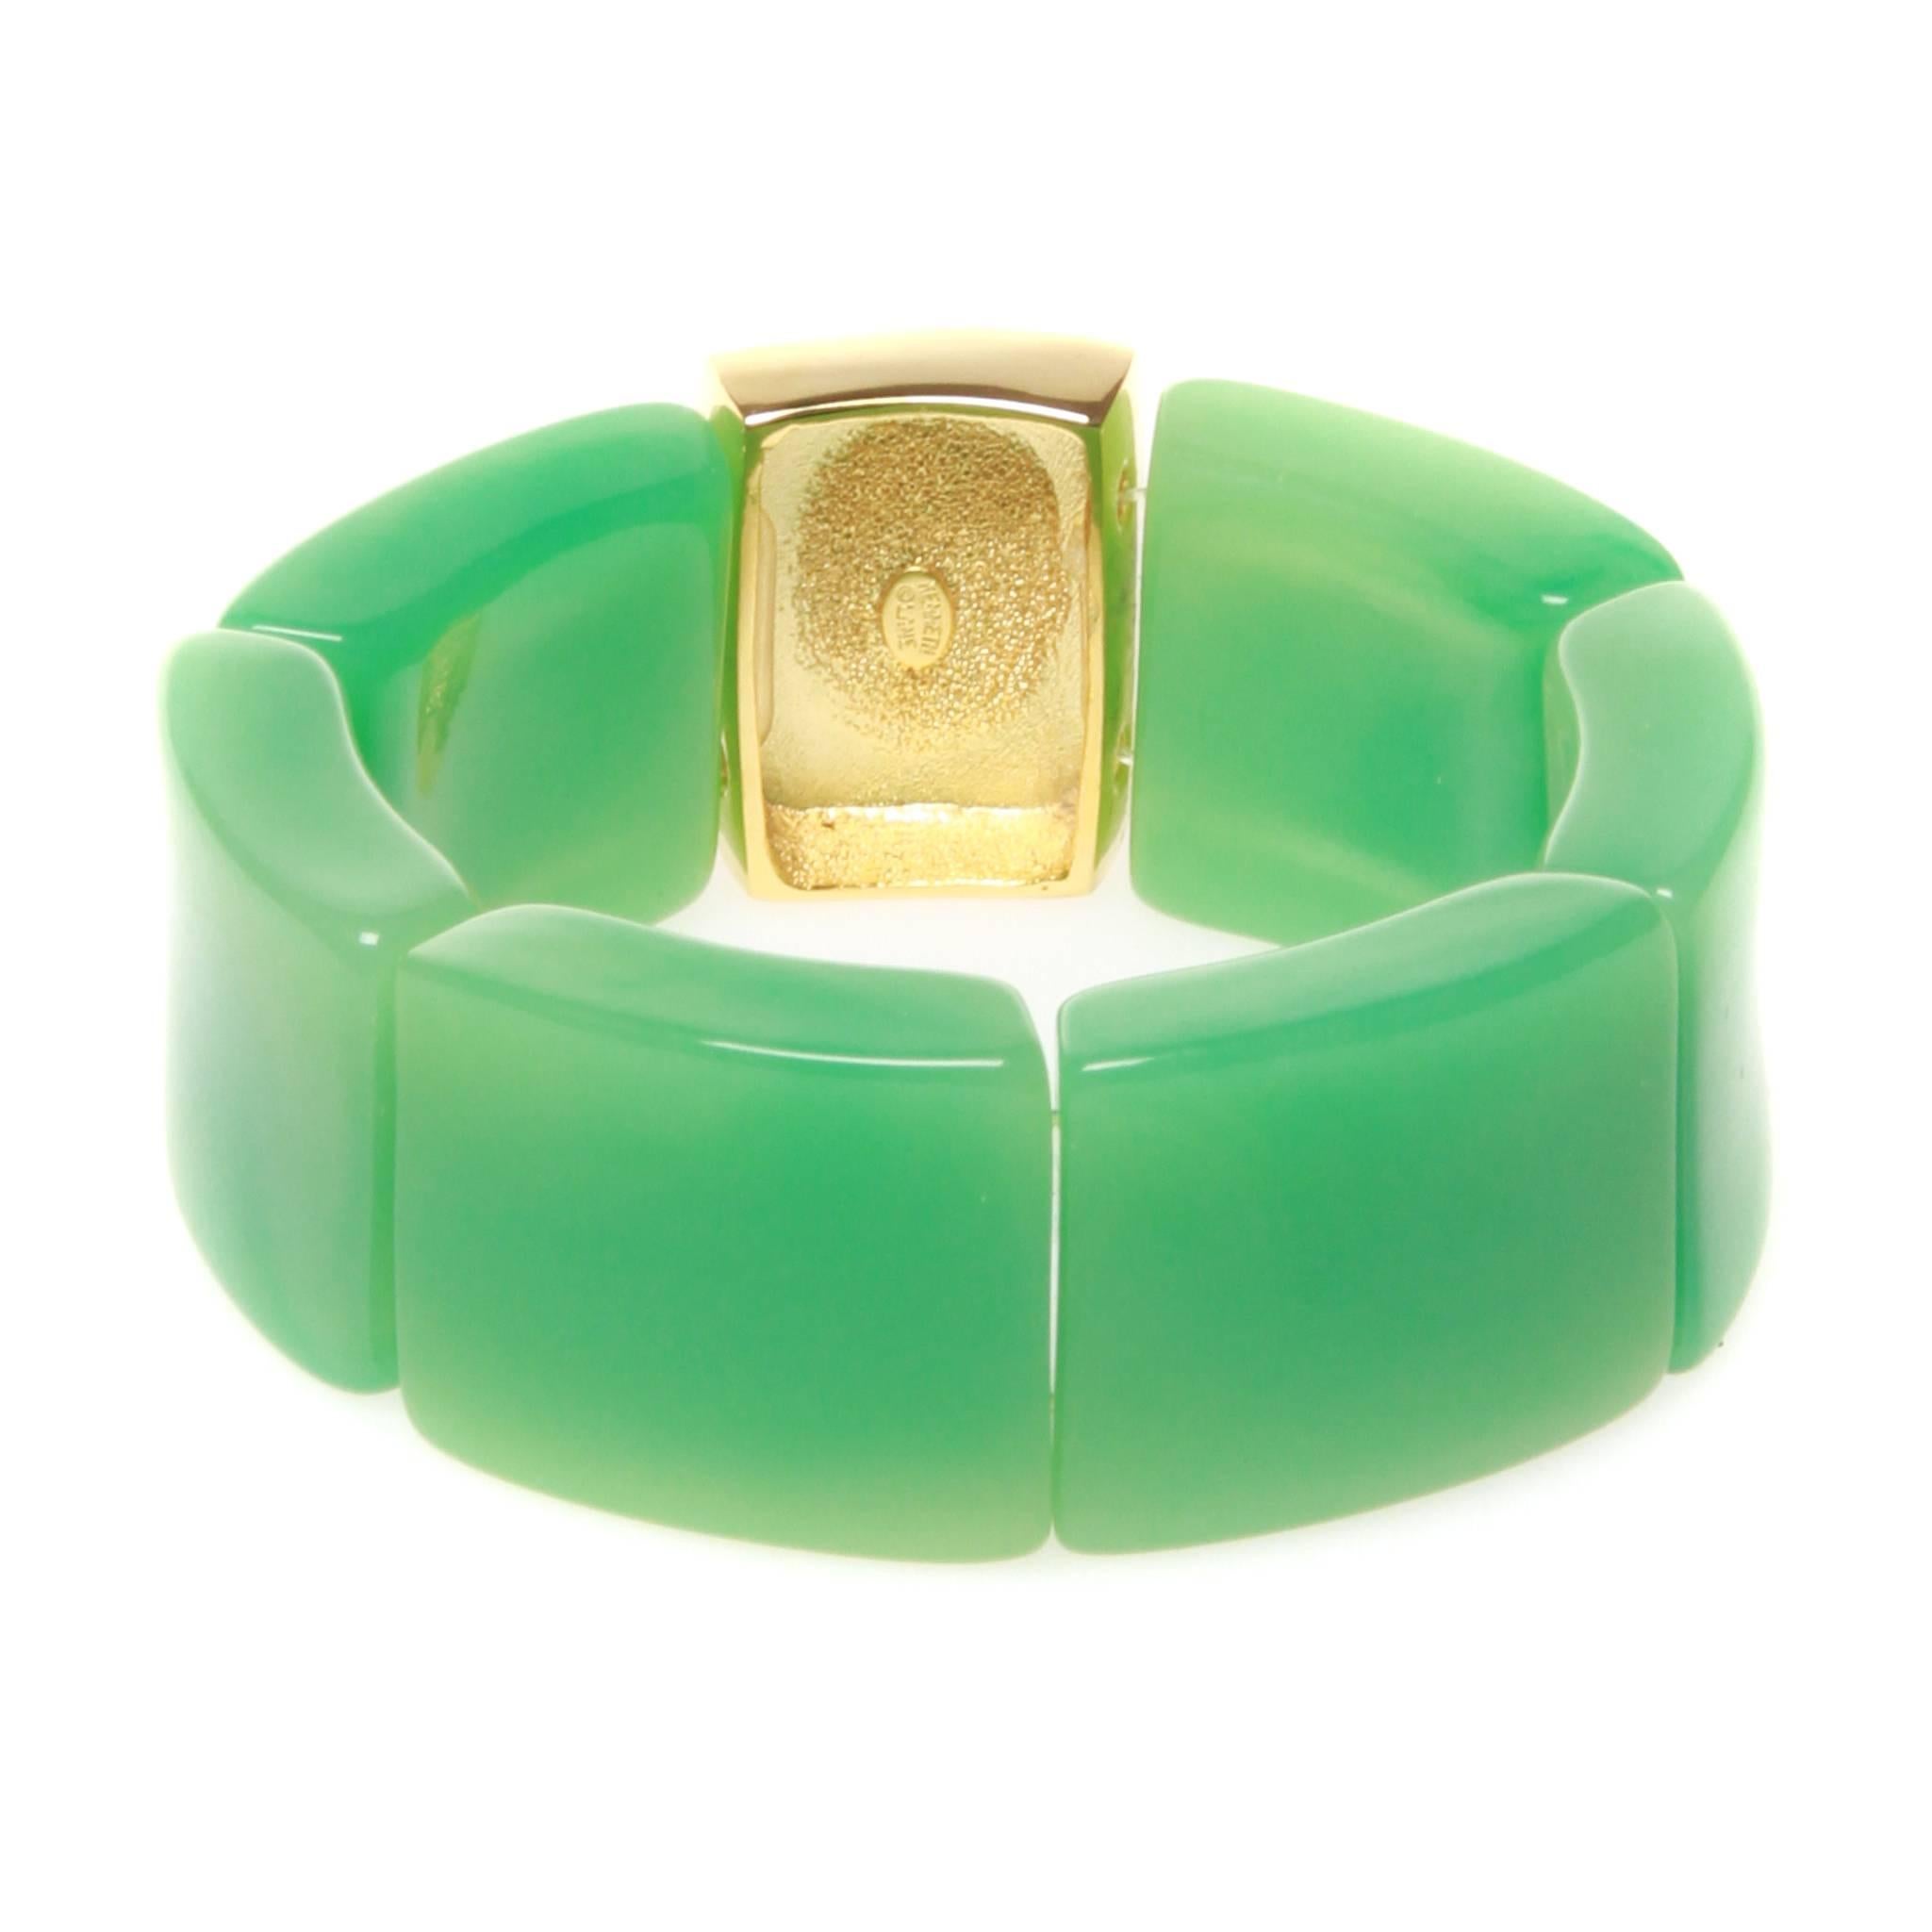 Vintage Kenneth Jay Lane cuff in green resin featuring a central gold-tone segment set with an orange oval stone. Brand stamp on metal.